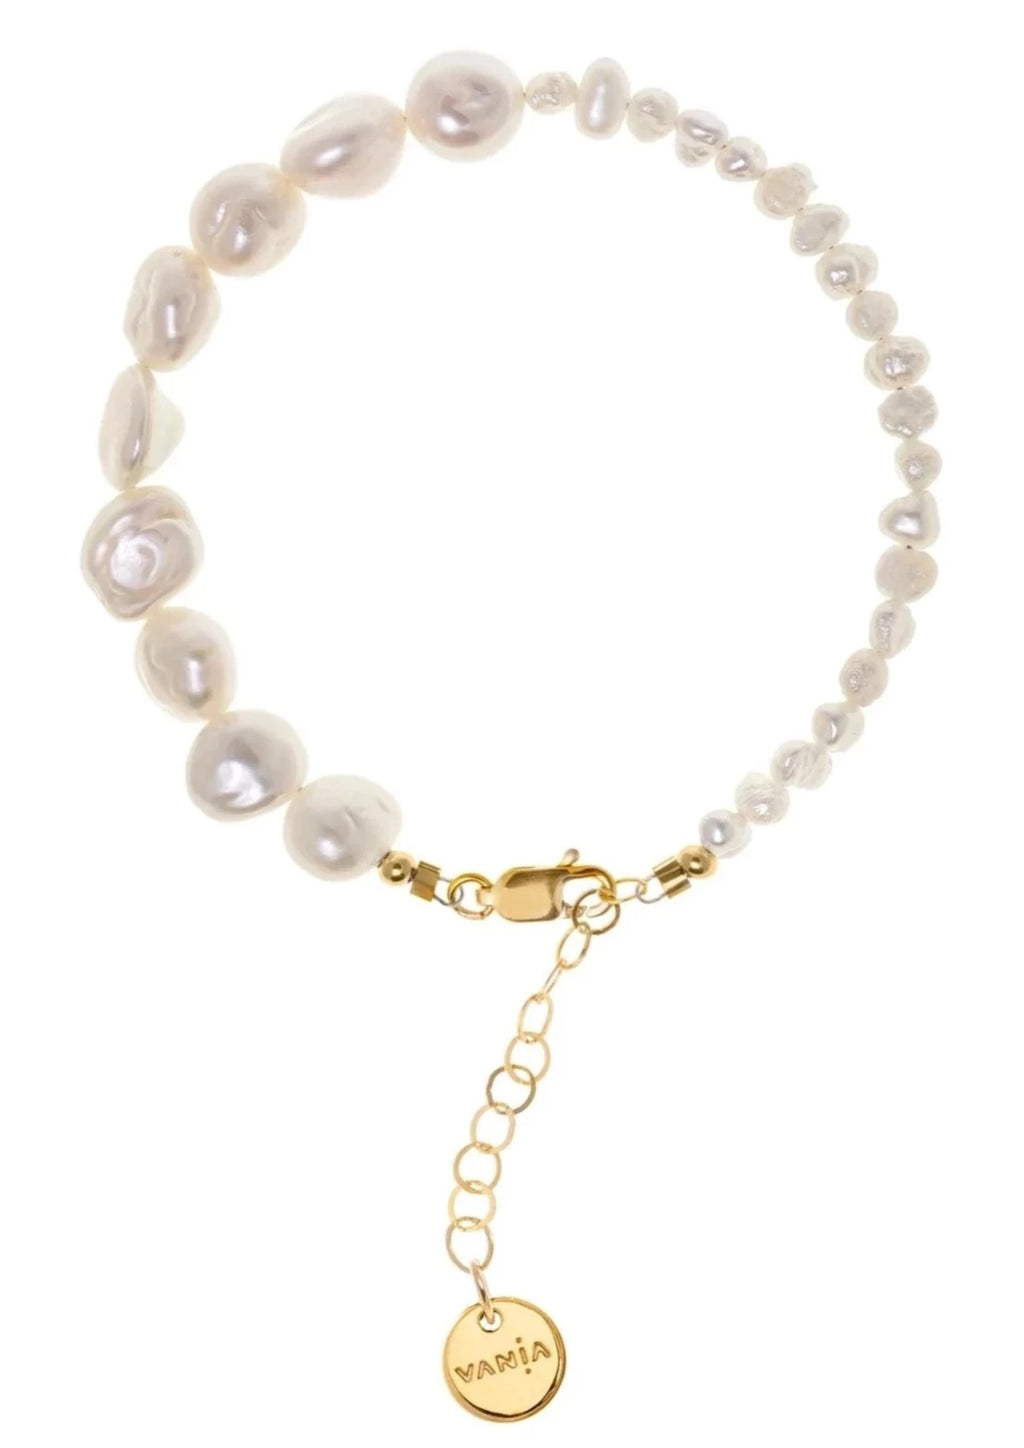 Margarita Paraiso Bracelet - By Vania  Inspired by the crystal clear waters of Playa Paraiso in Margarita Island, Venezuela.  This necklace offers you the best of both worlds featuring half large & half small Baroque Freshwater pearls. The Paraiso bracelet measures 17.5 long. And, it is finished with a 14ct Gold-filled + 3cm extension chain.